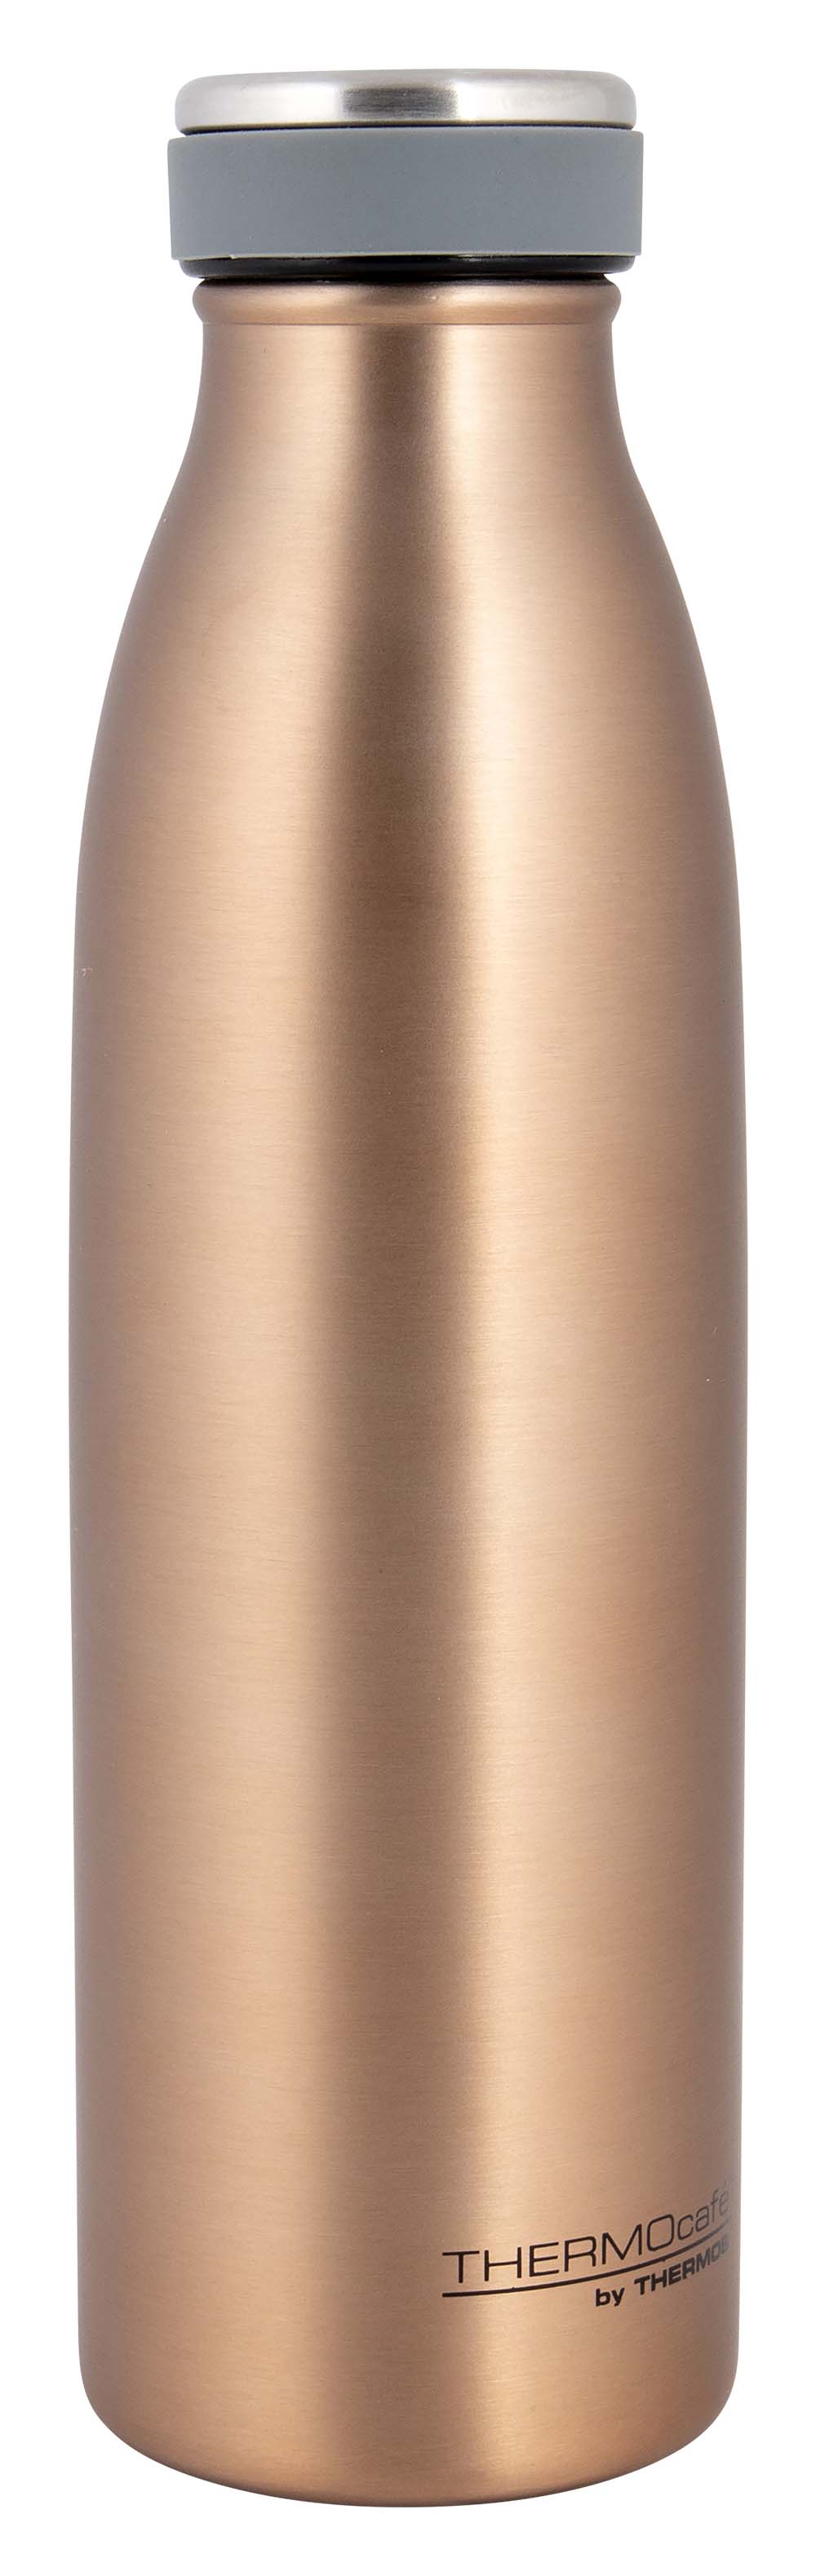 Thermos - Drinkfles - Cafe - Brons